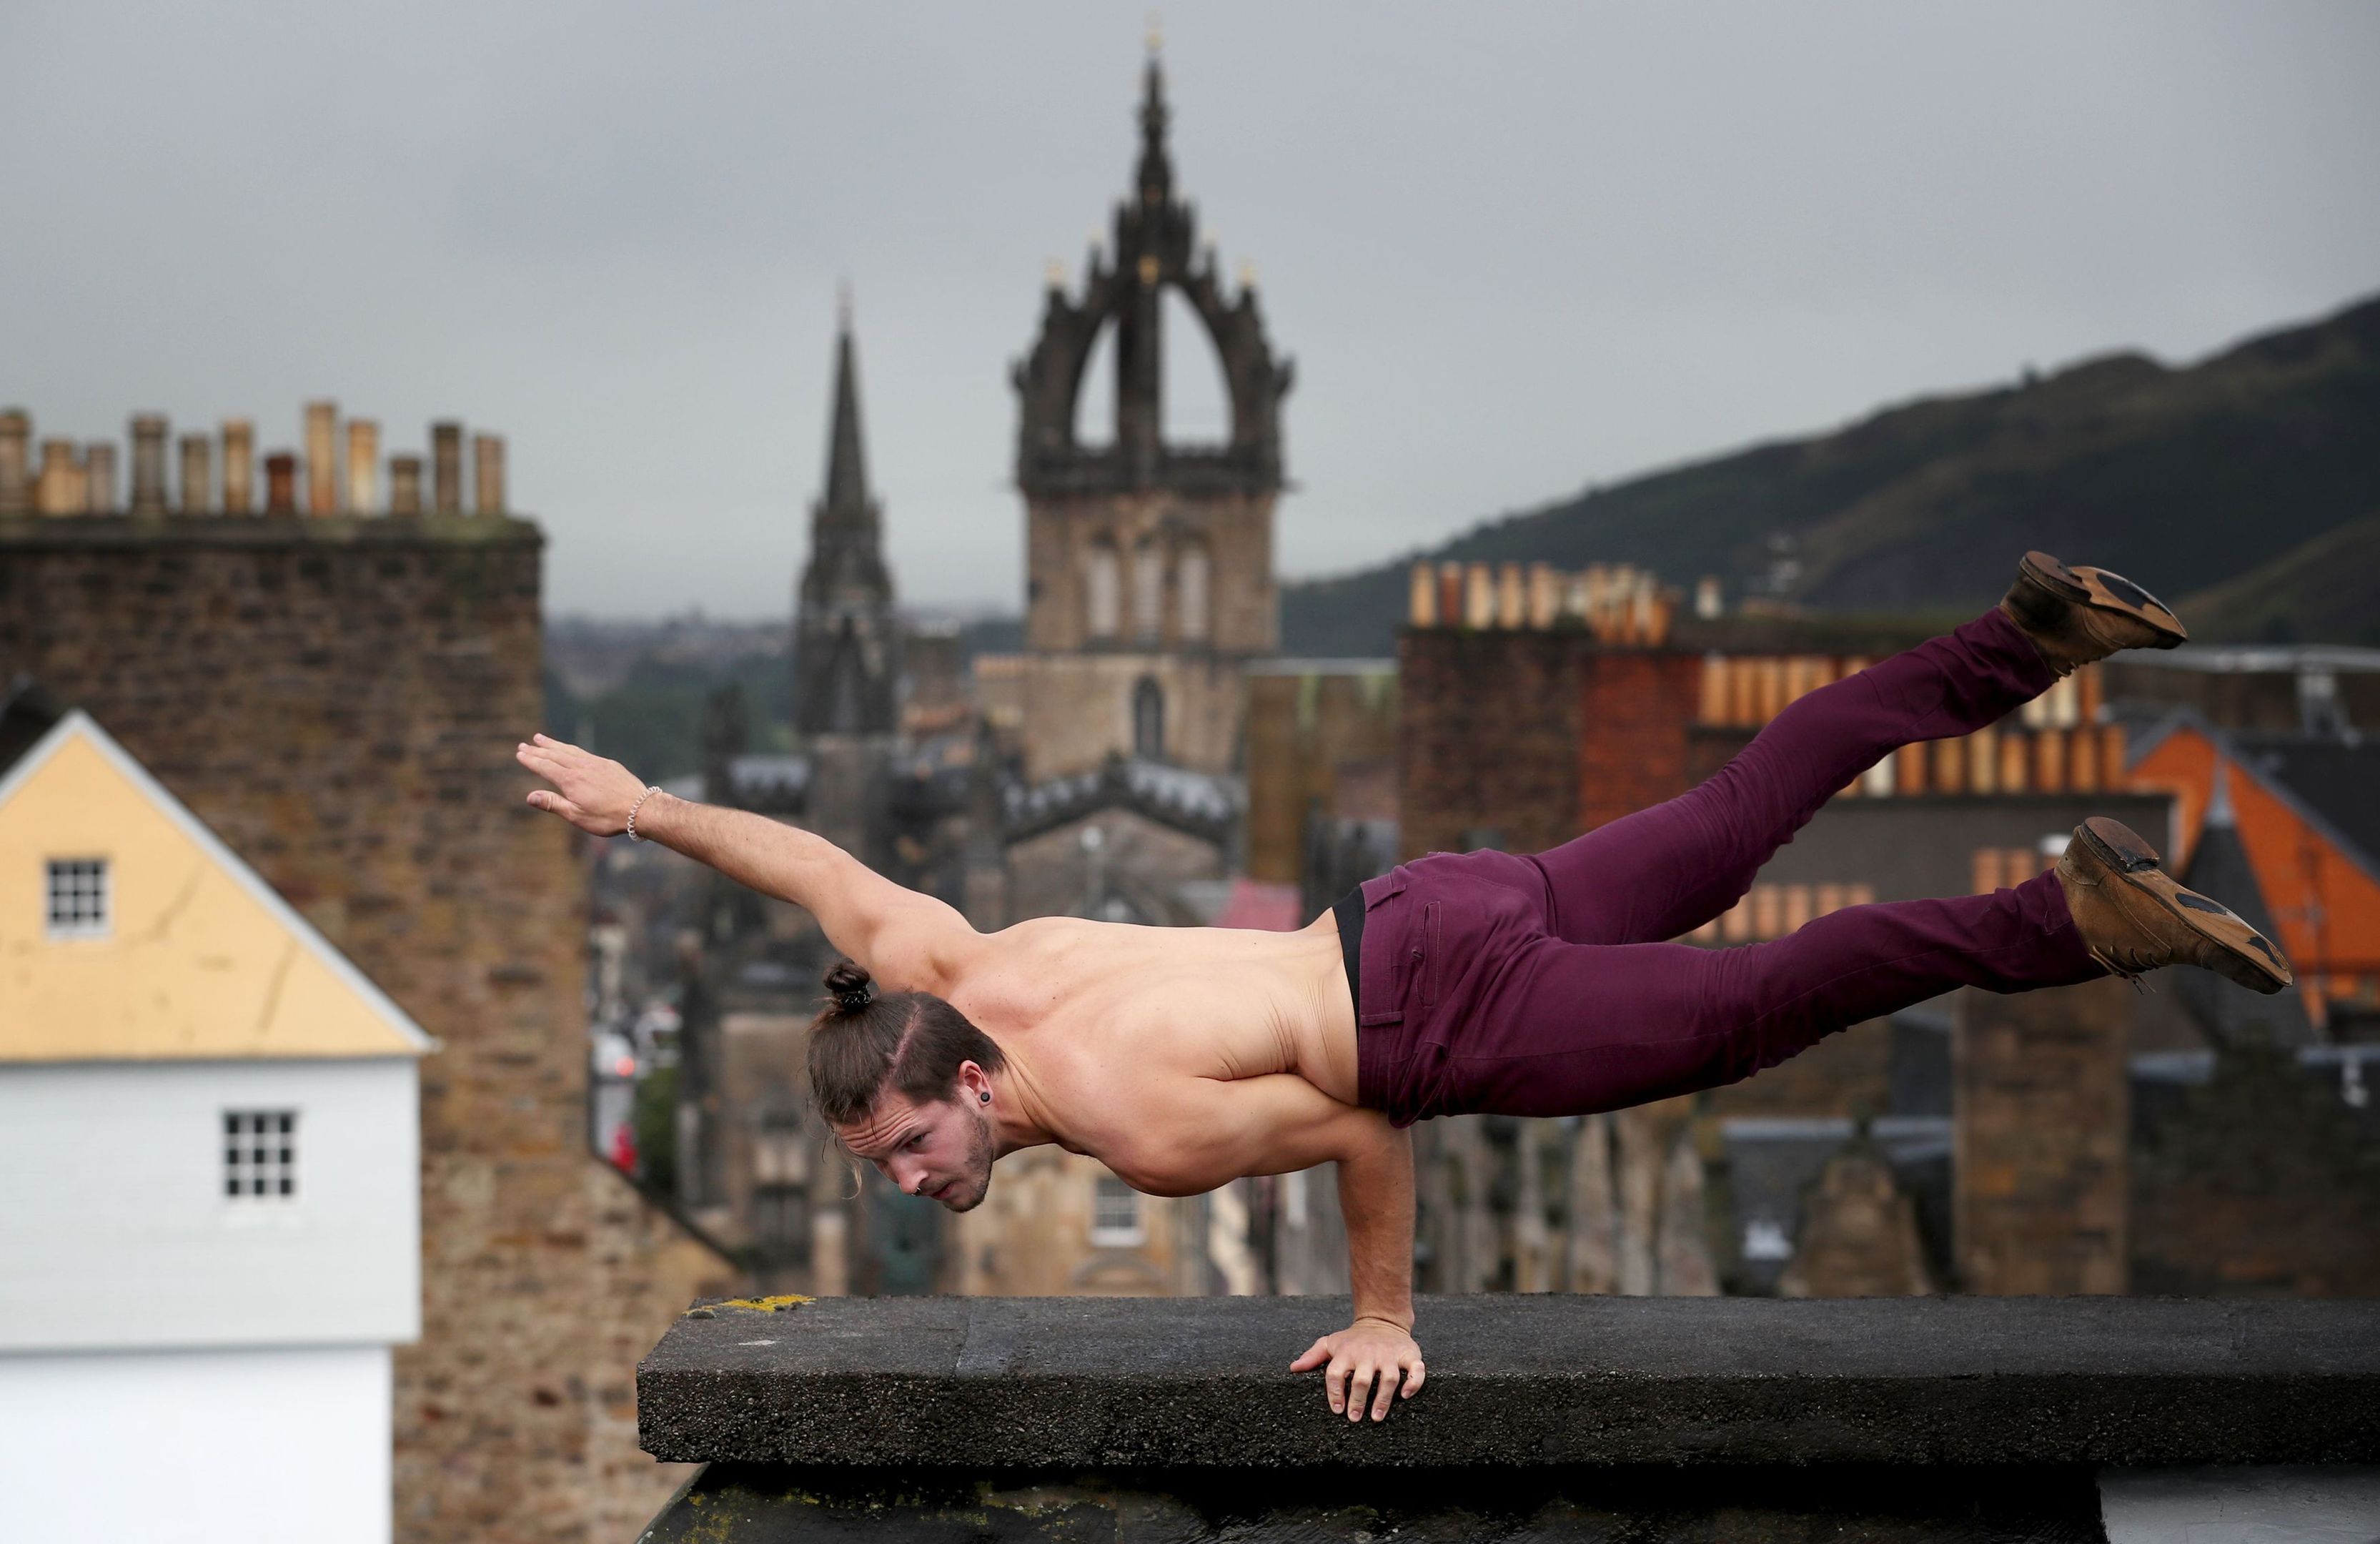 Cal Harris, a member of Head First Acrobats, balances on the roof of Camera Obscura and World of Illusions in Edinburgh, ahead of his Fringe Festival show Elixir. (Jane Barlow/PA Wire)